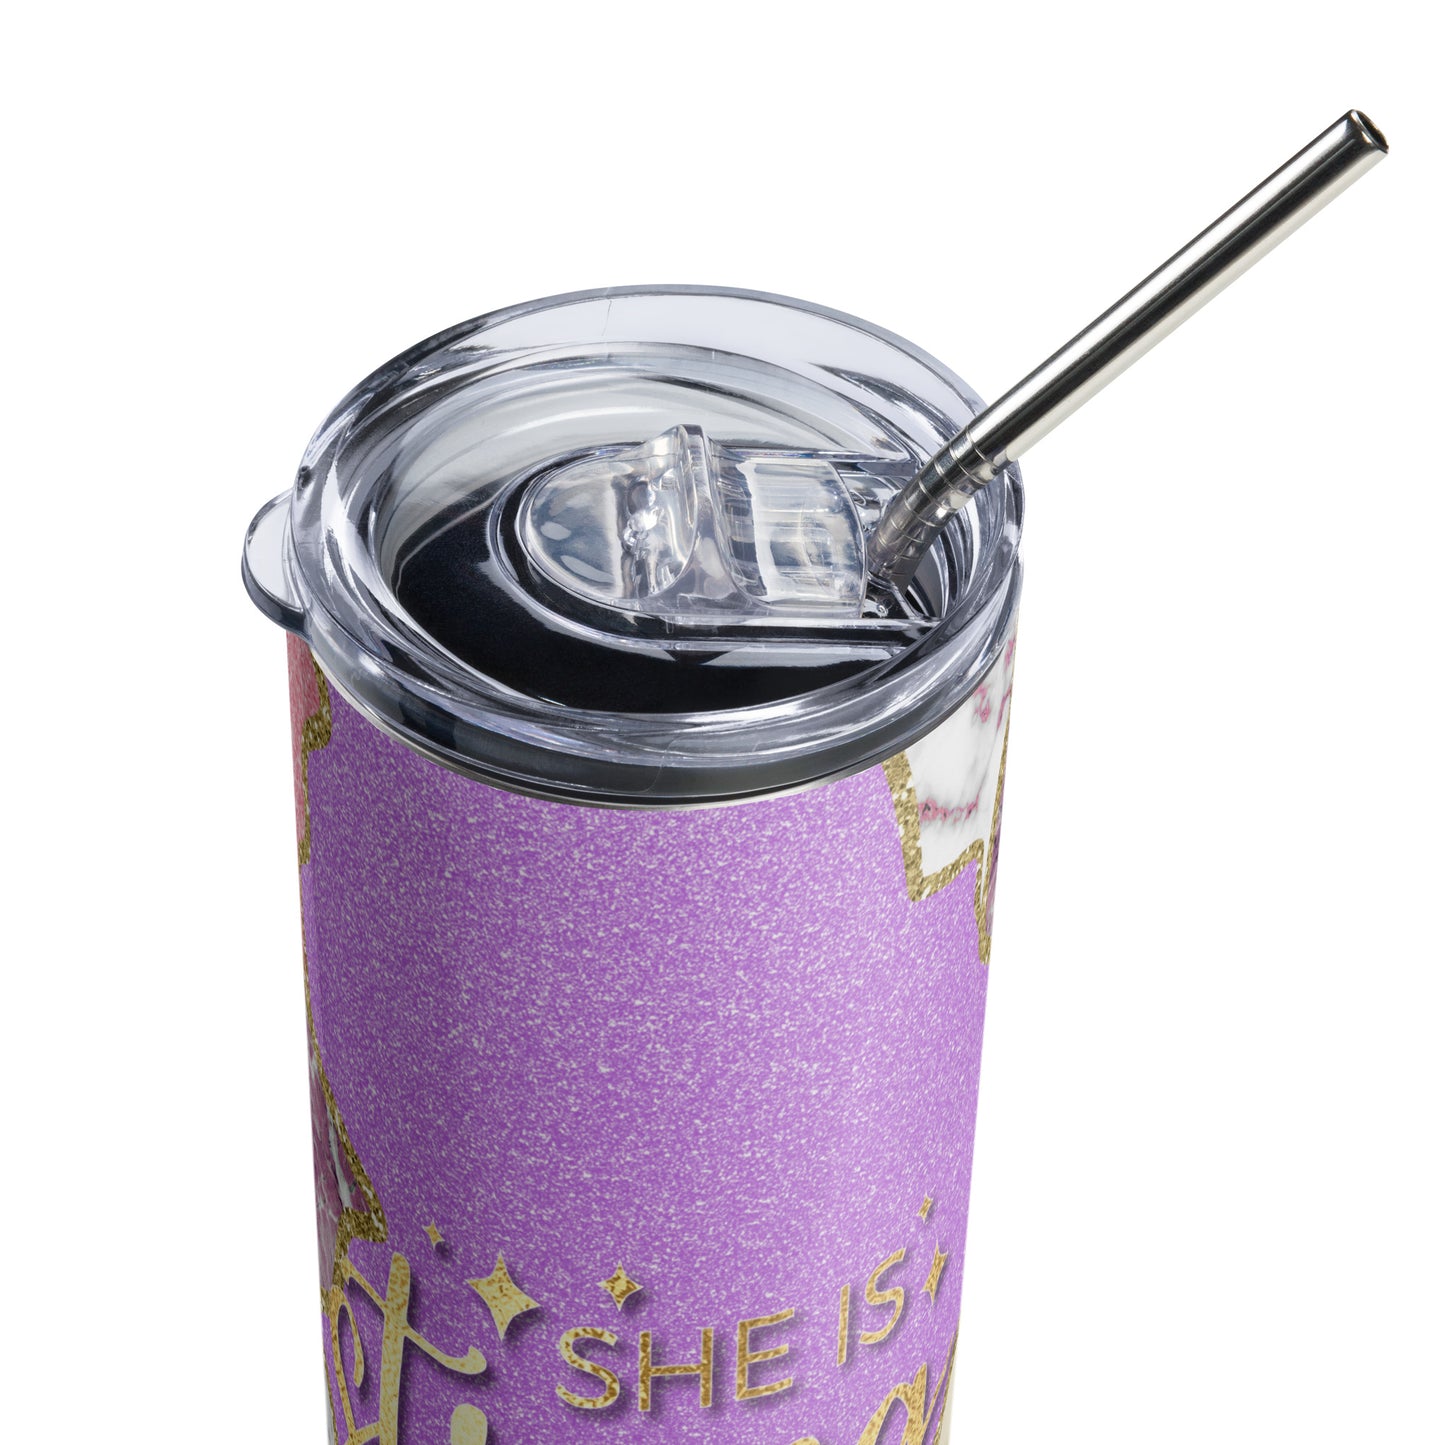 A 20 oz stainless steel tumbler adorned with an uplifting quote, reminding us of the strength within every woman.